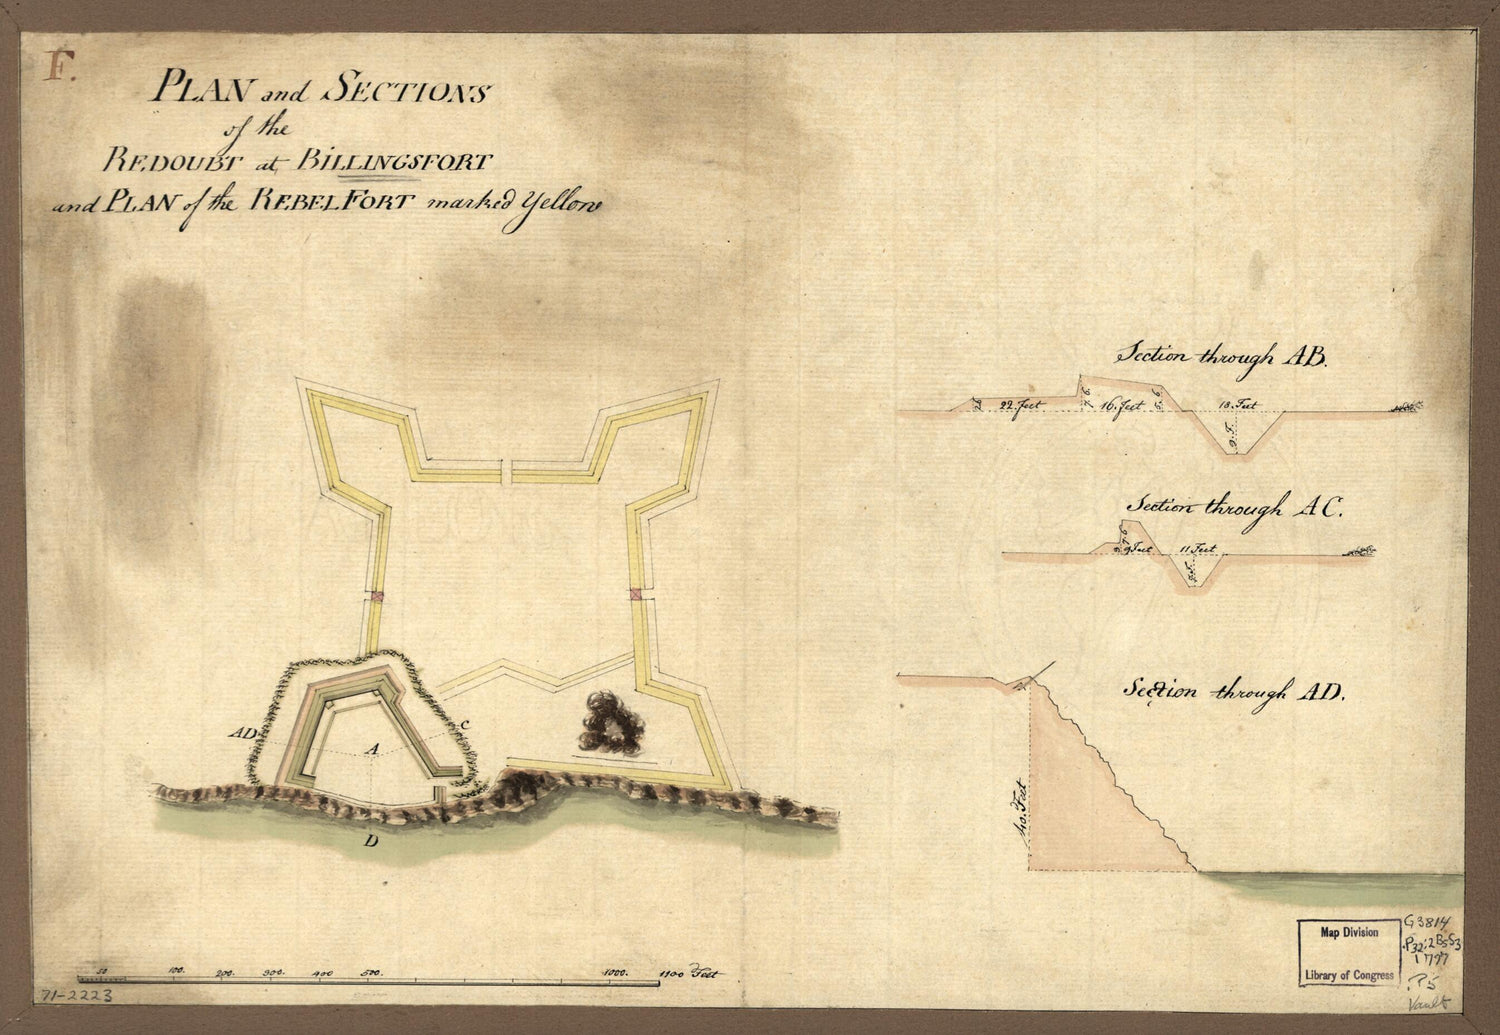 This old map of Plan and Sections of the Redoubt at Billingsfort and Plan of the Rebel Fort Marked Yellow from 1777 was created by  in 1777